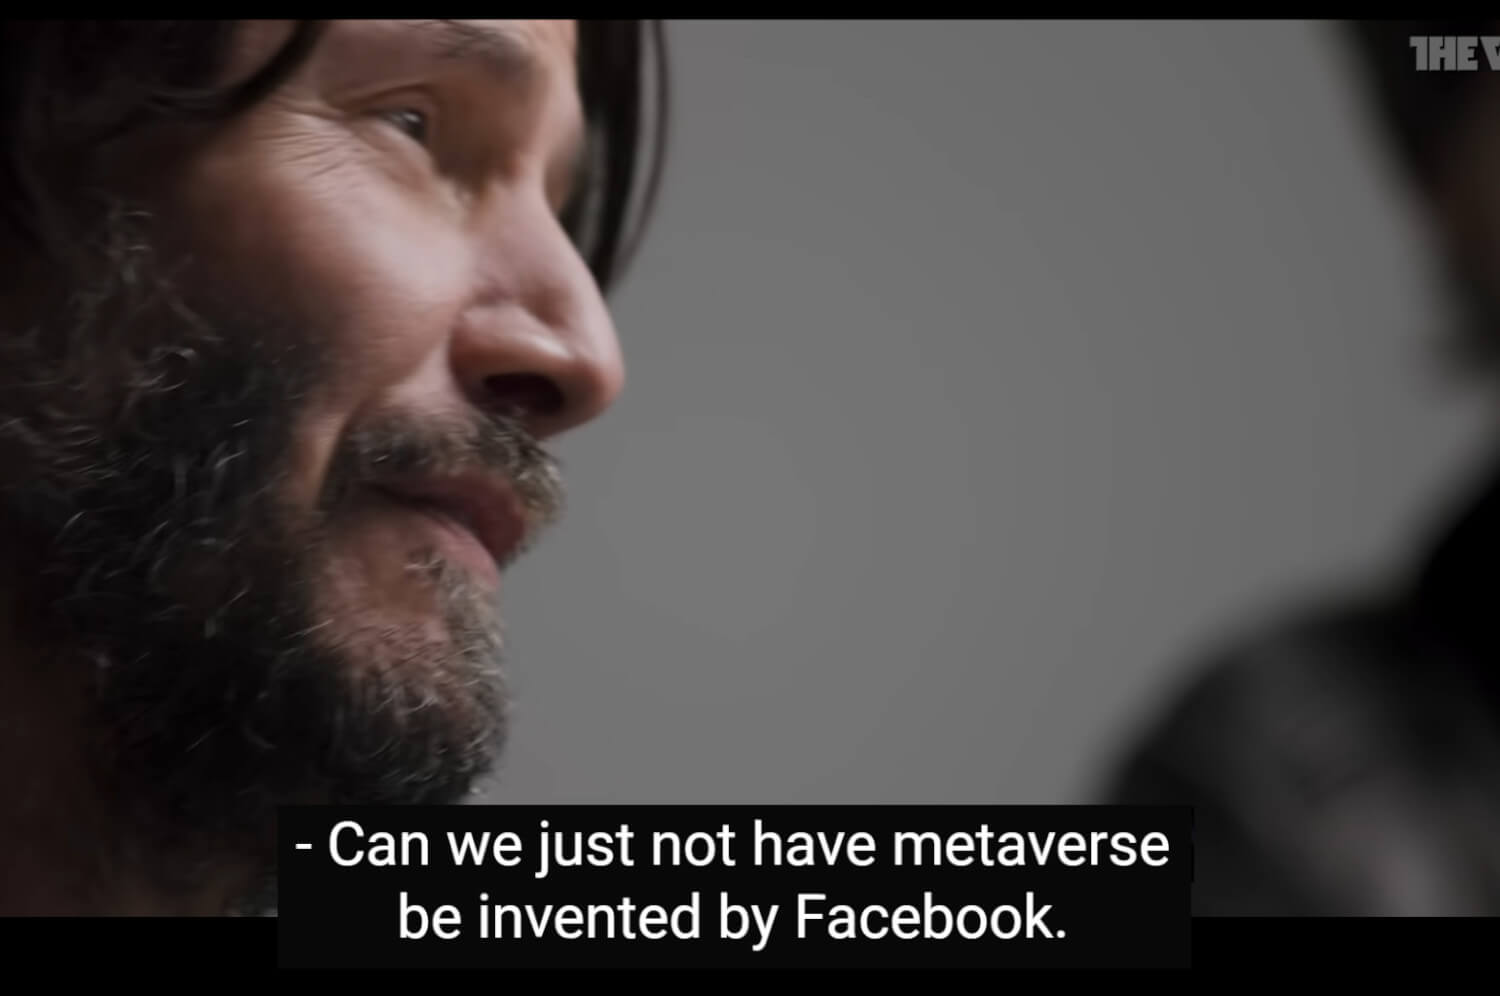 Keanu spreads the gospel that Facebook isn't the first metaverse